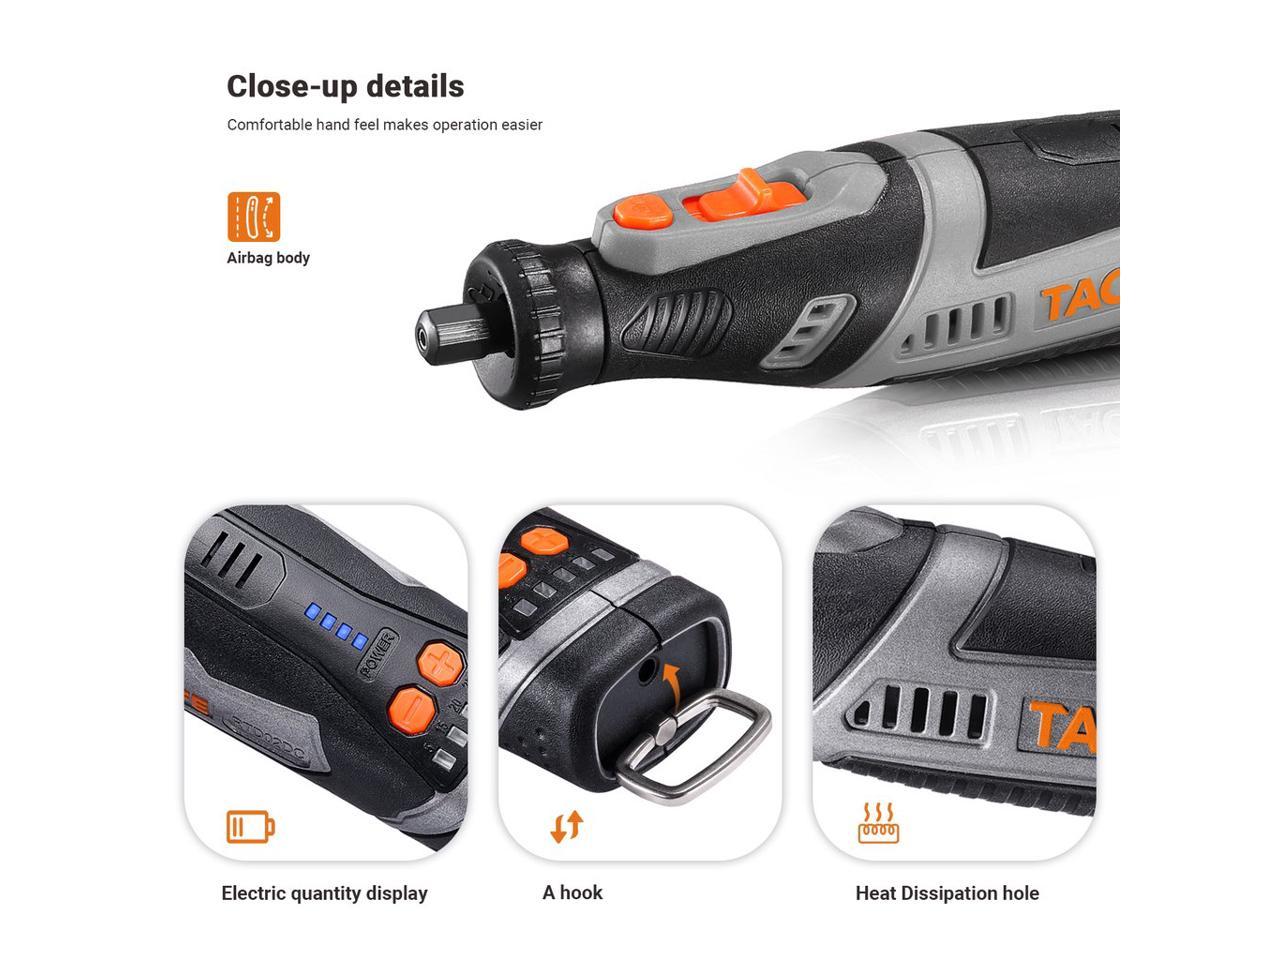 TACKLIFE RTD02DC - Cordless rotary tool 8V Motor 2.0 Ah Li-ion Battery with 43 Accessories, Long Endurance home/home other Rotary Tool